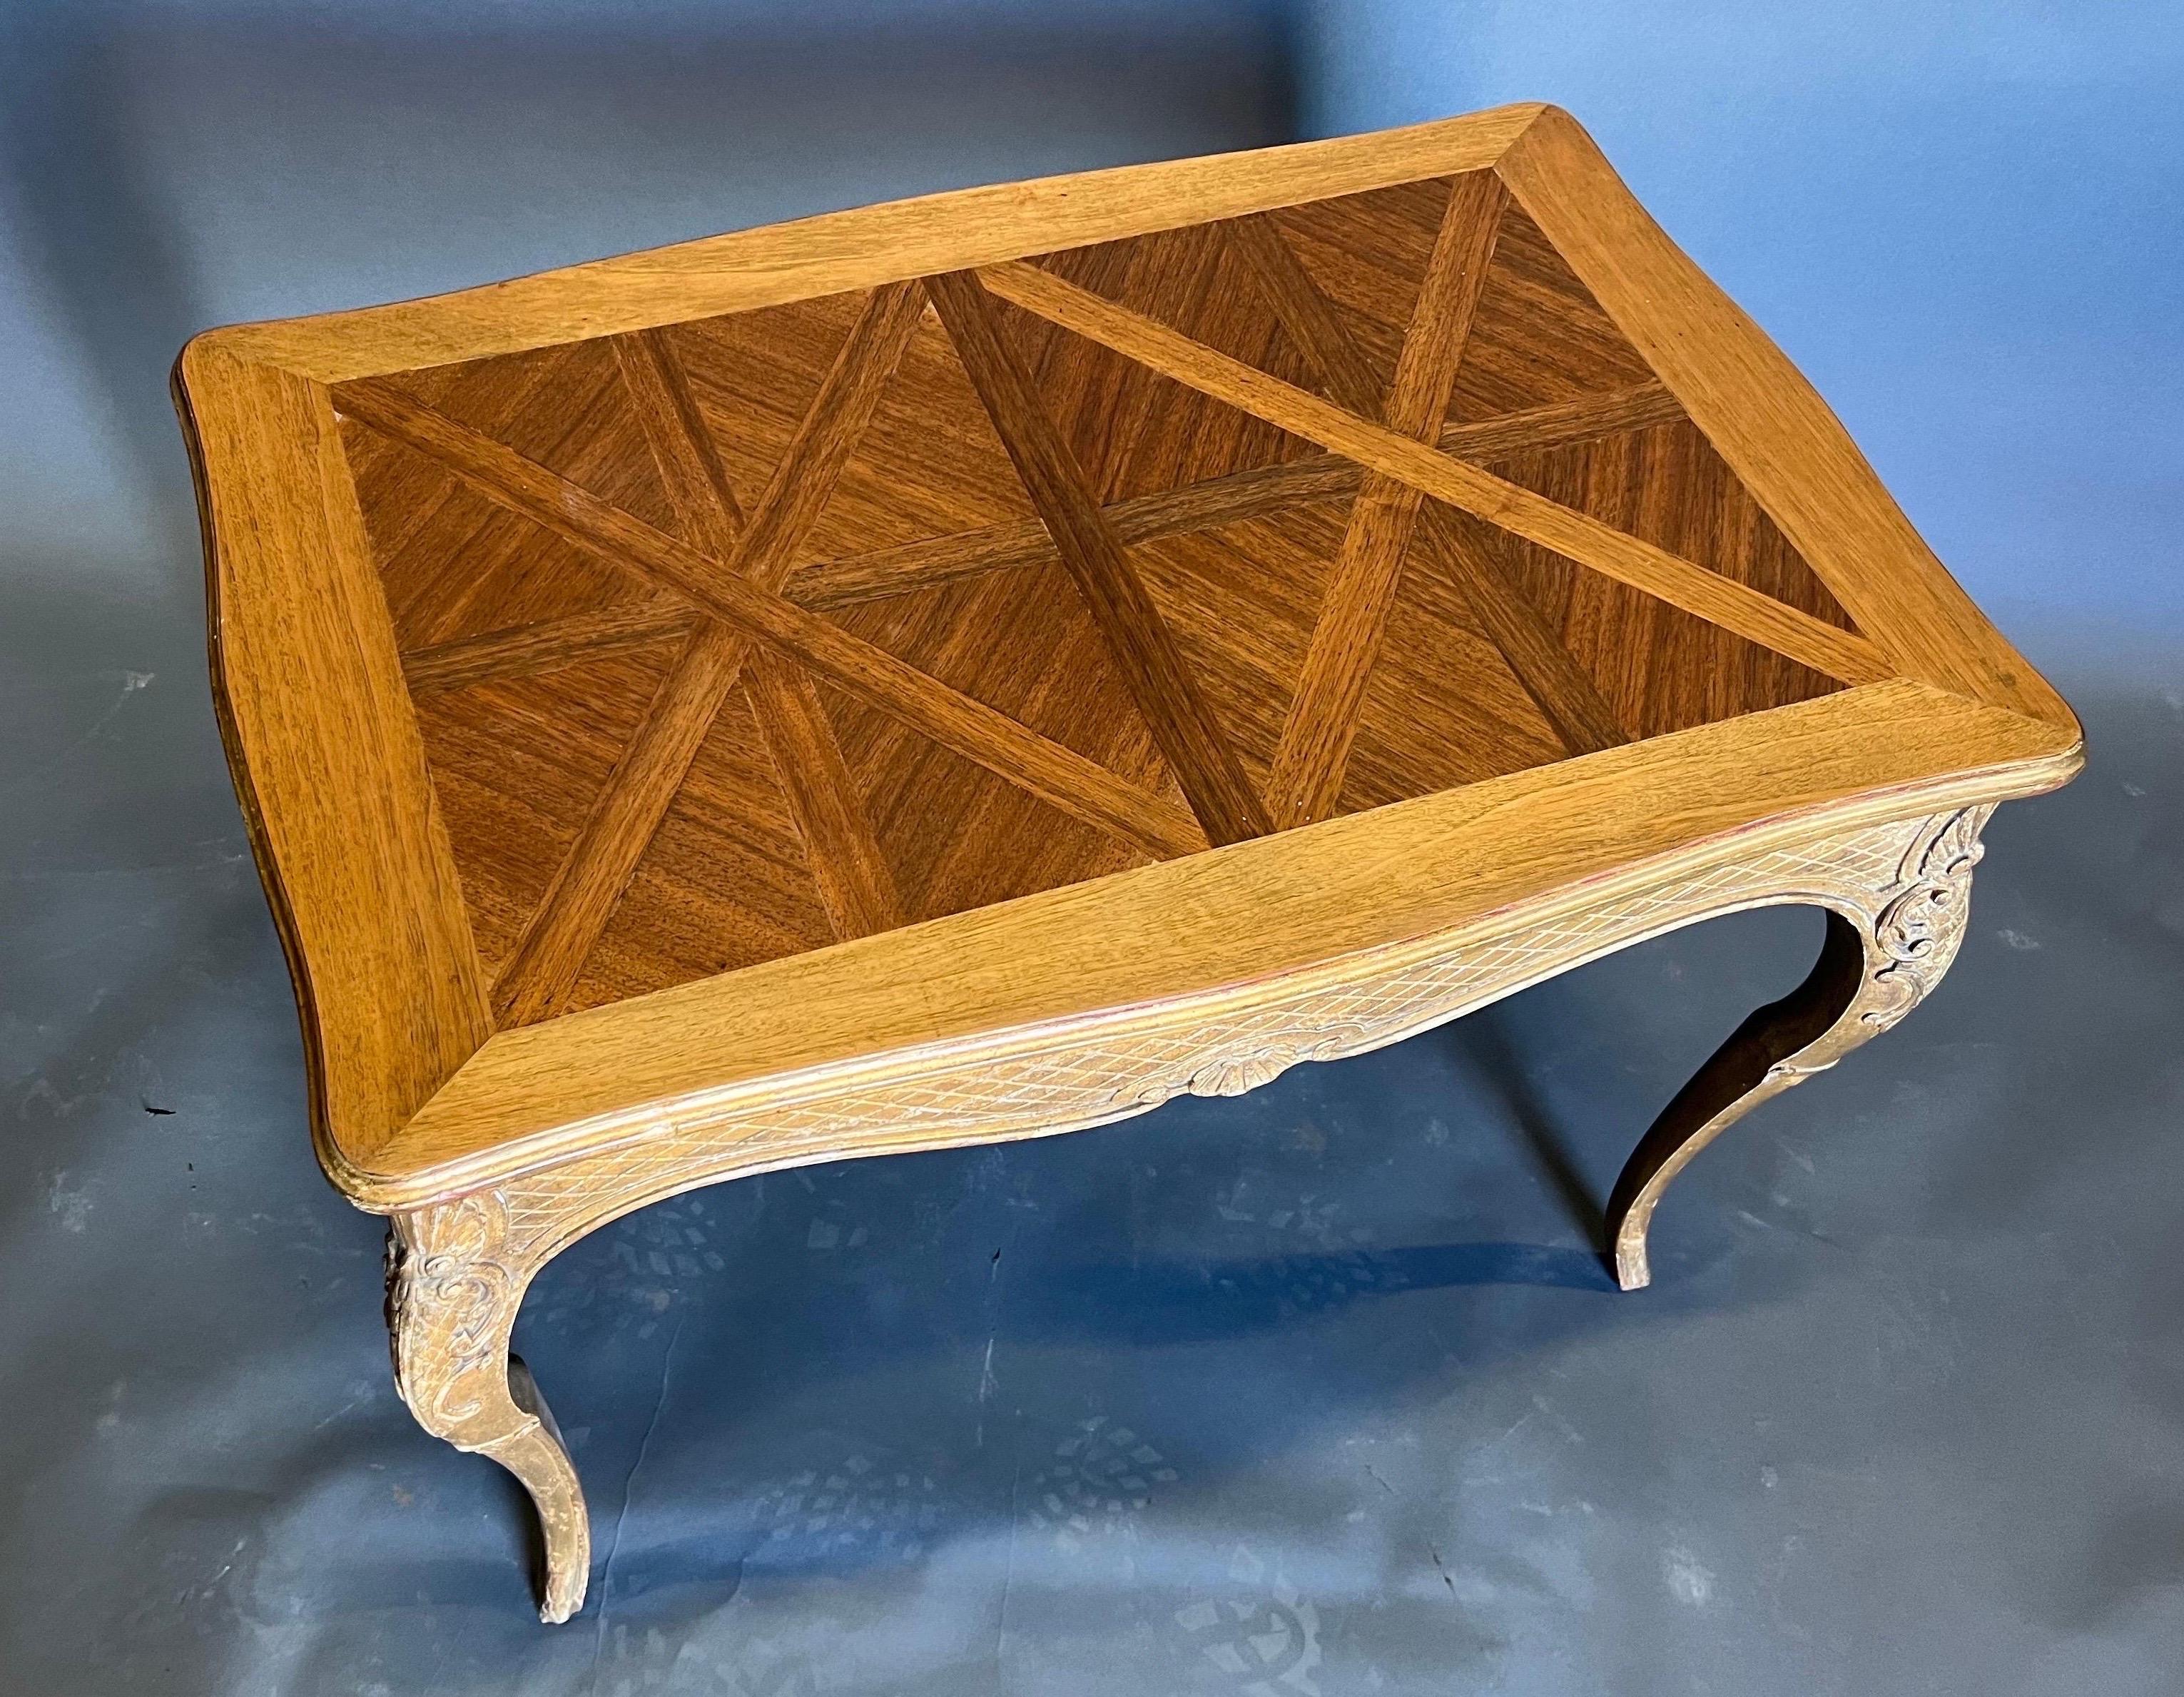 Late 19th century French gold giltwood and parquetry top table from a great estate in the Carlyle building, Manhattan